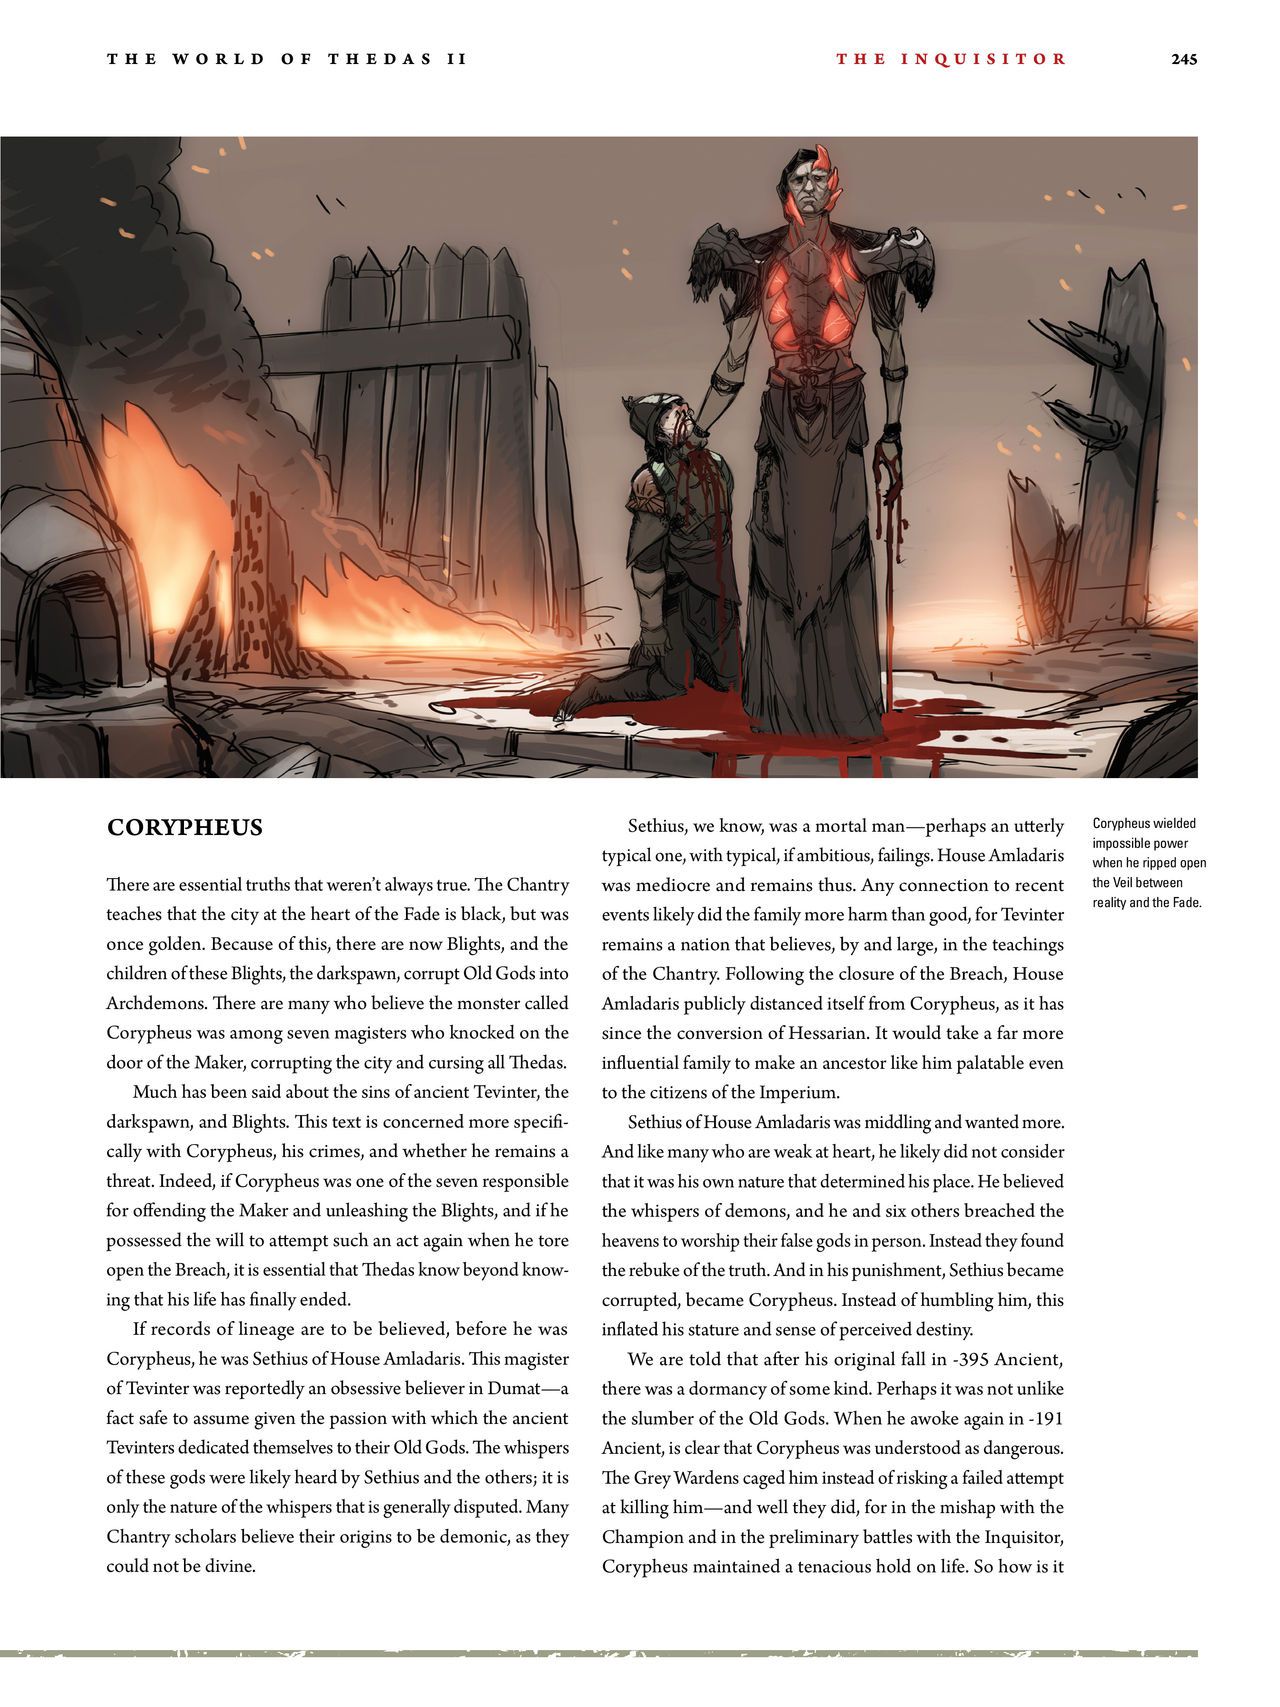 Dragon Age - The World of Thedas v02 239